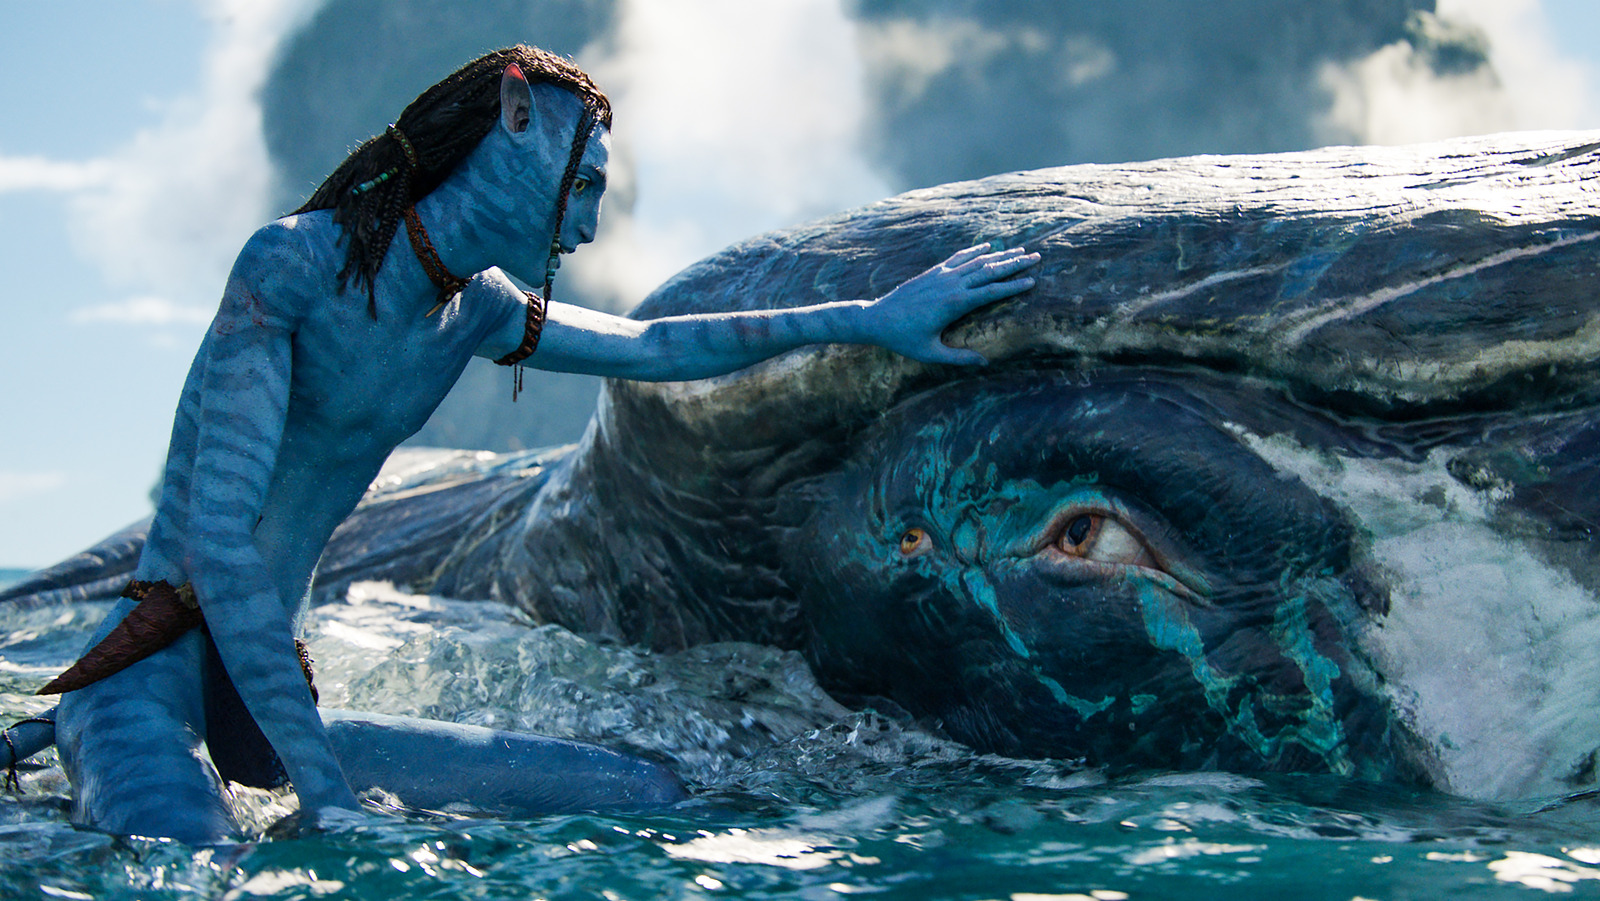 Avatar The Way of Water Box Office Numbers Film Earns 5317M In Profit   Deadline